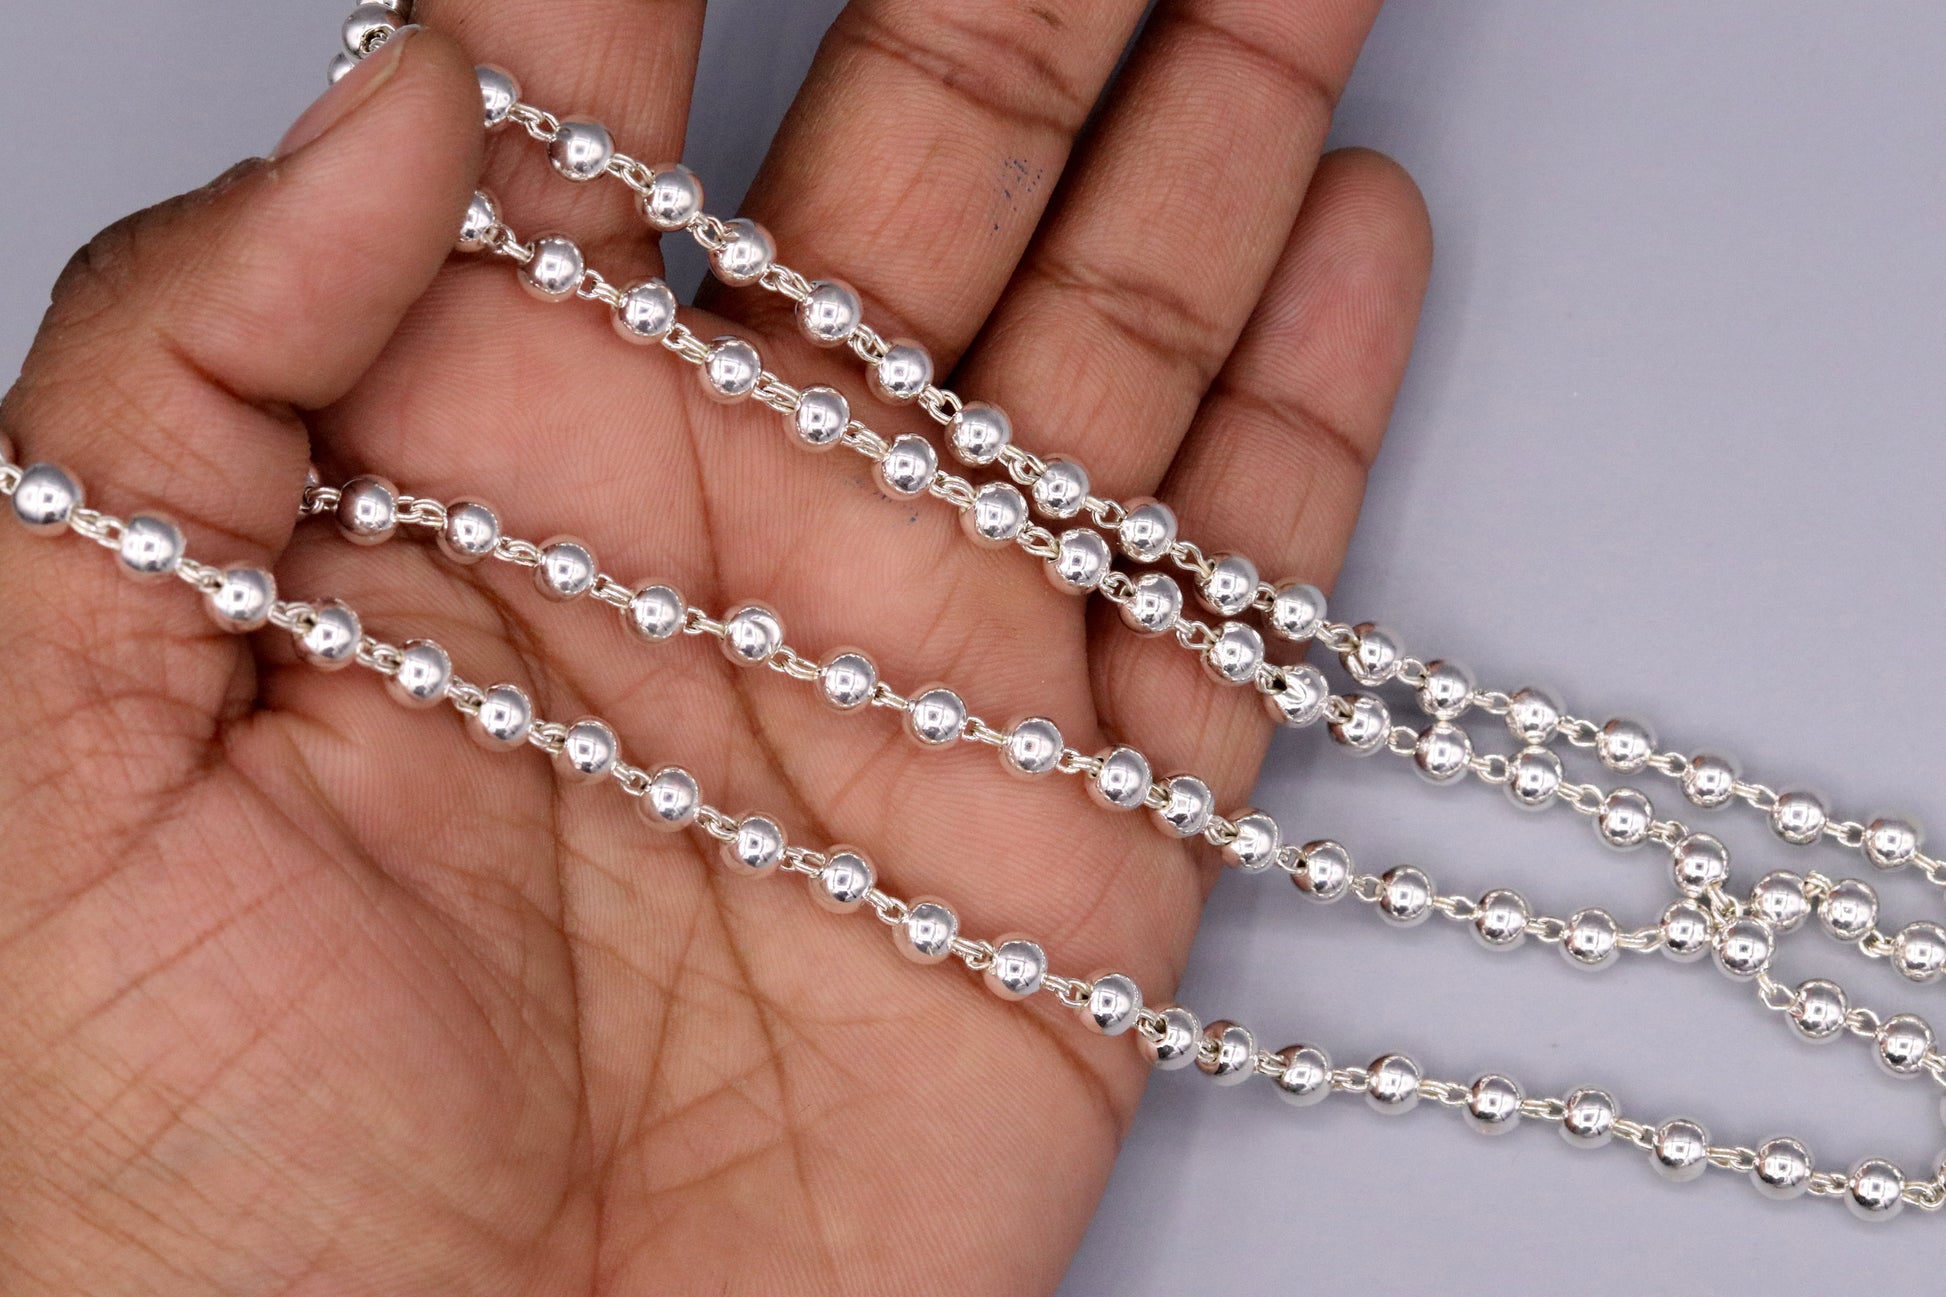 Solid silver handmade fabulous silver 109 beads chain necklace for jap mala for japping mantra for god, mediation ch22 - TRIBAL ORNAMENTS